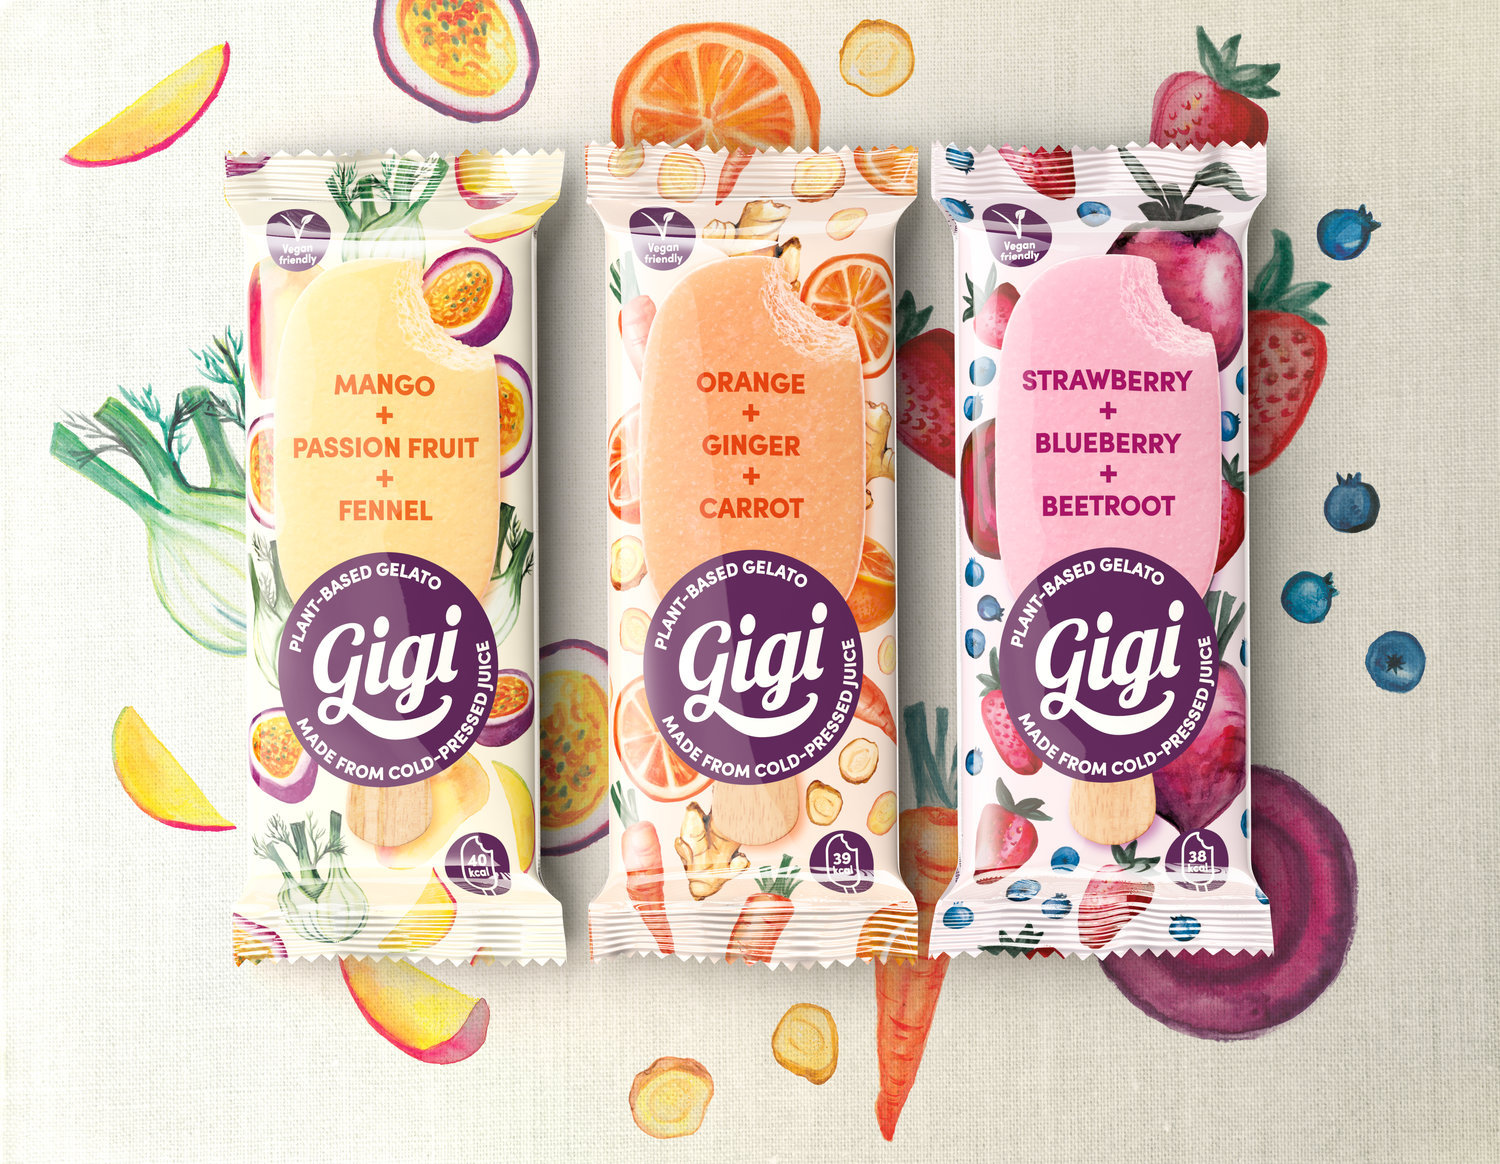 News: Plant-based Gelato Gigi Launches With Category-changing Brand and Packaging by Straight Forward Design